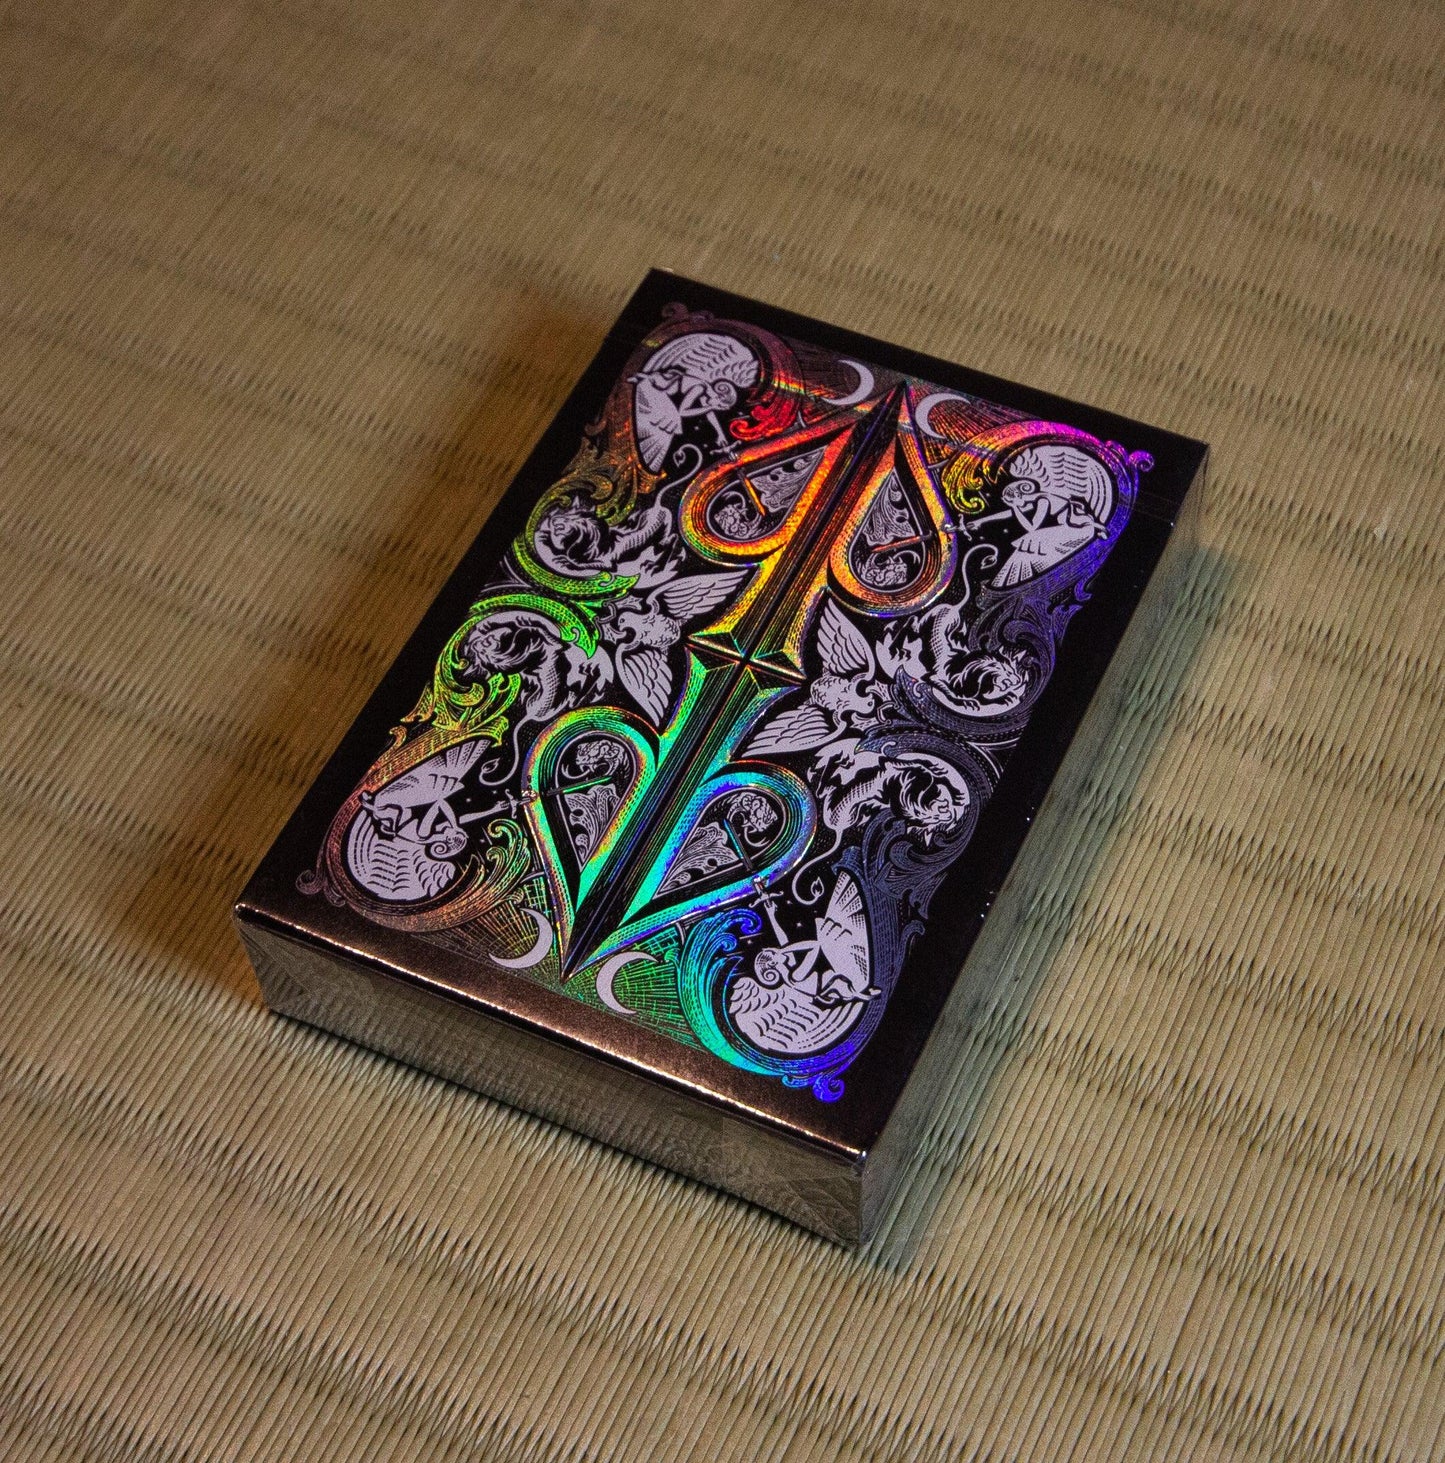 ONYX Holographic Split Spades (artist proof) Playing Cards by Red Black Inc - Deckita Decks